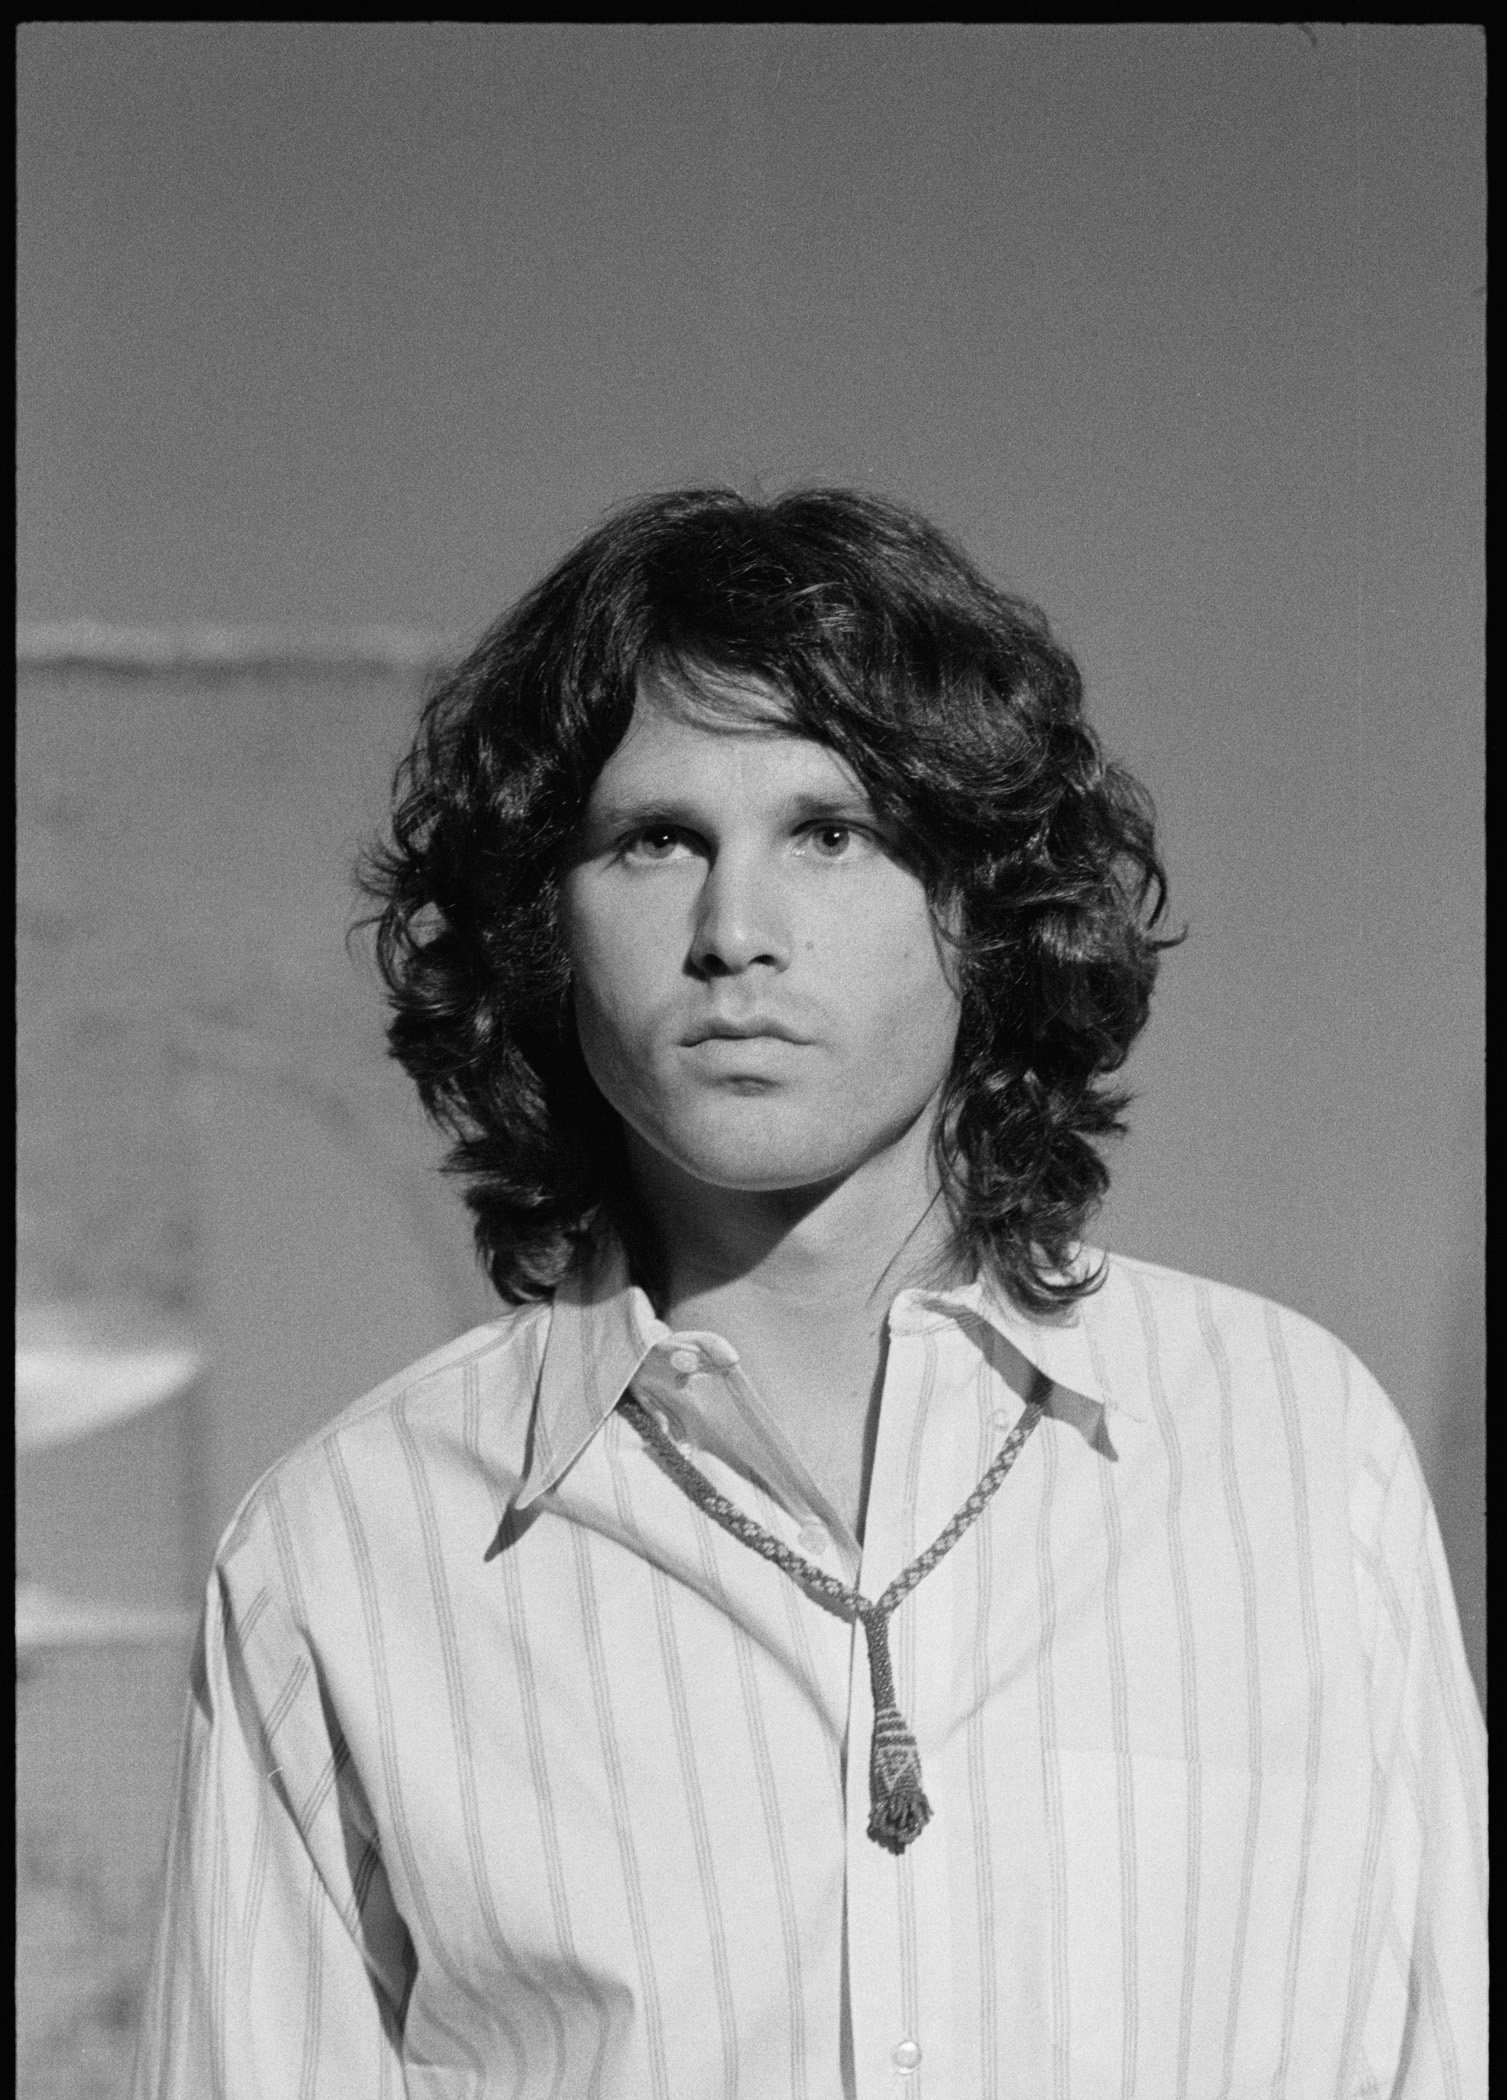 Portrait of American singer Jim Morrison (1943 - 1971), leader of the rock band The Doors, on 'The Smothers Brothers Comedy Hour,' California, January 6, 1969. | Source: Getty Images